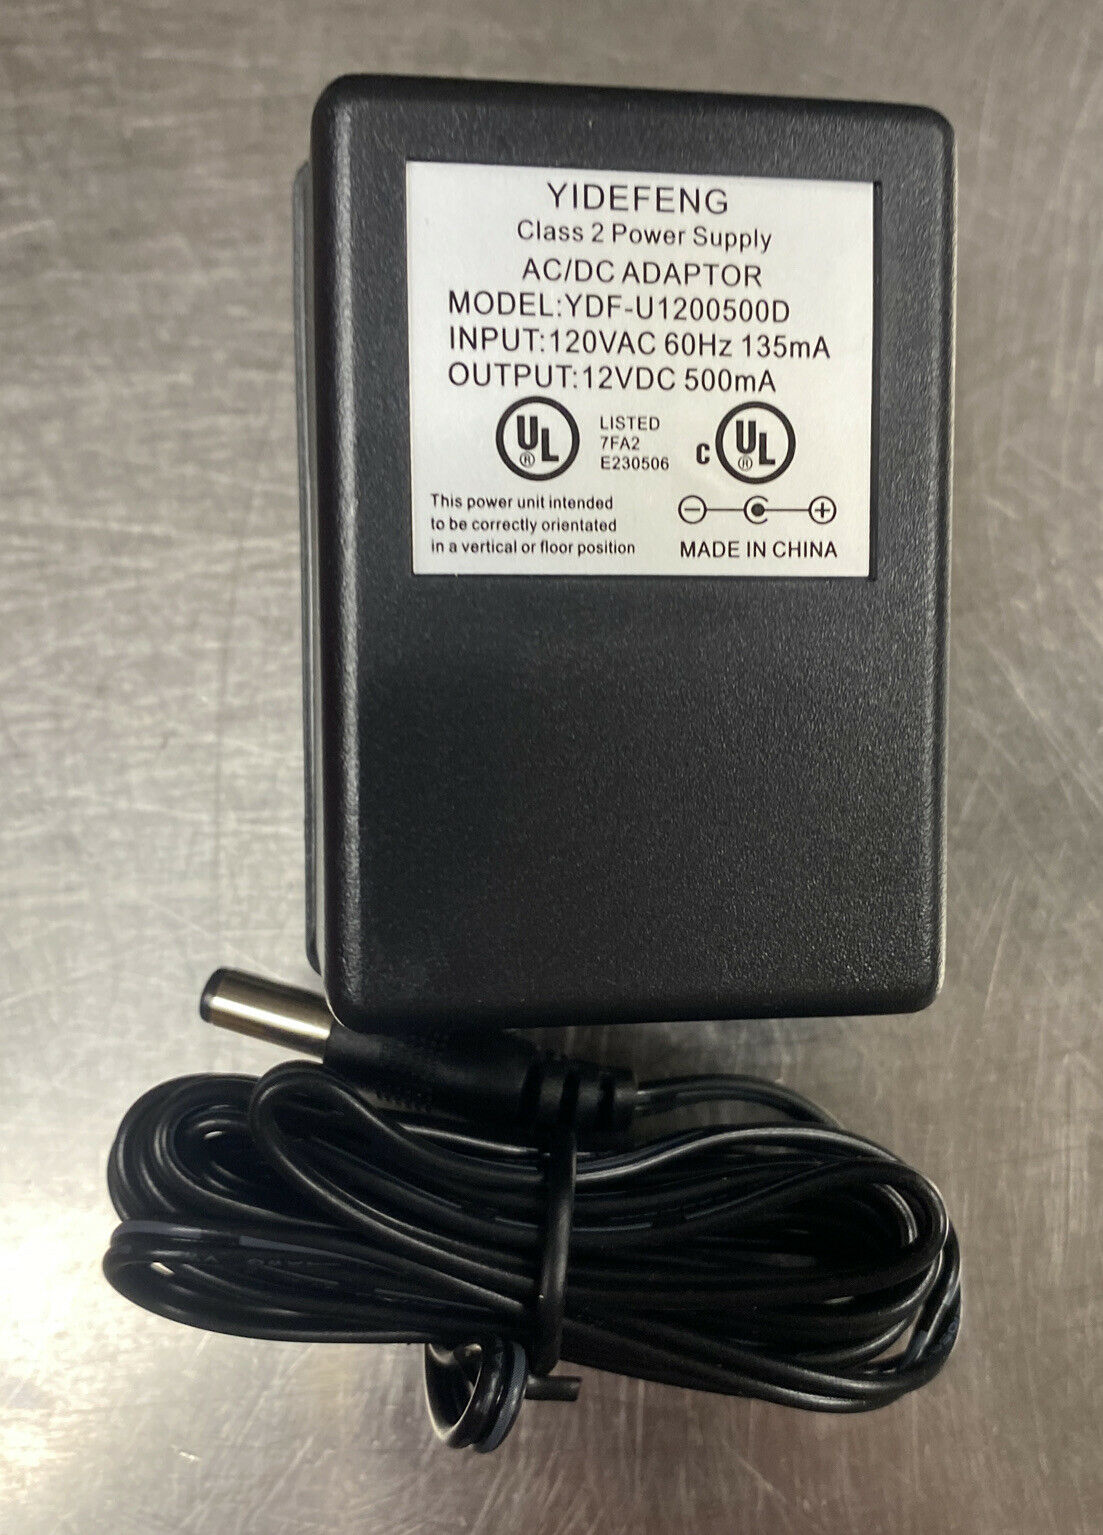 12V 500mA AC DC Adapter Wall Mount Linear Power Supplies Adapter - Yidefeng Brand: Yidefeng Type: AC/DC Adapter Con - Click Image to Close